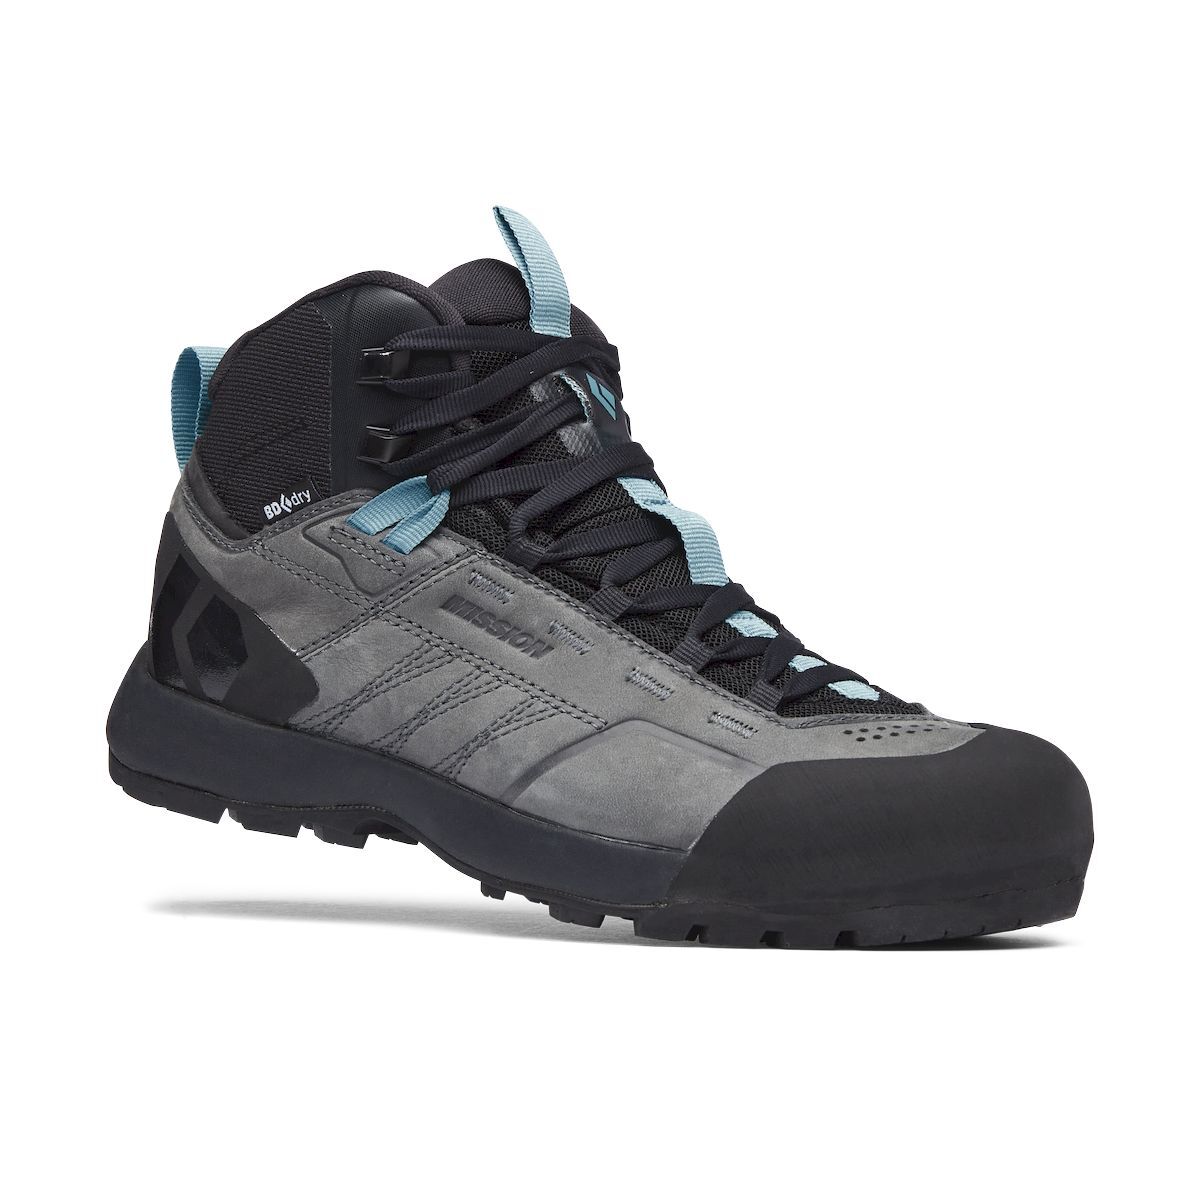 Black Diamond Mission Leather Mid Wp - Approach shoes - Women's